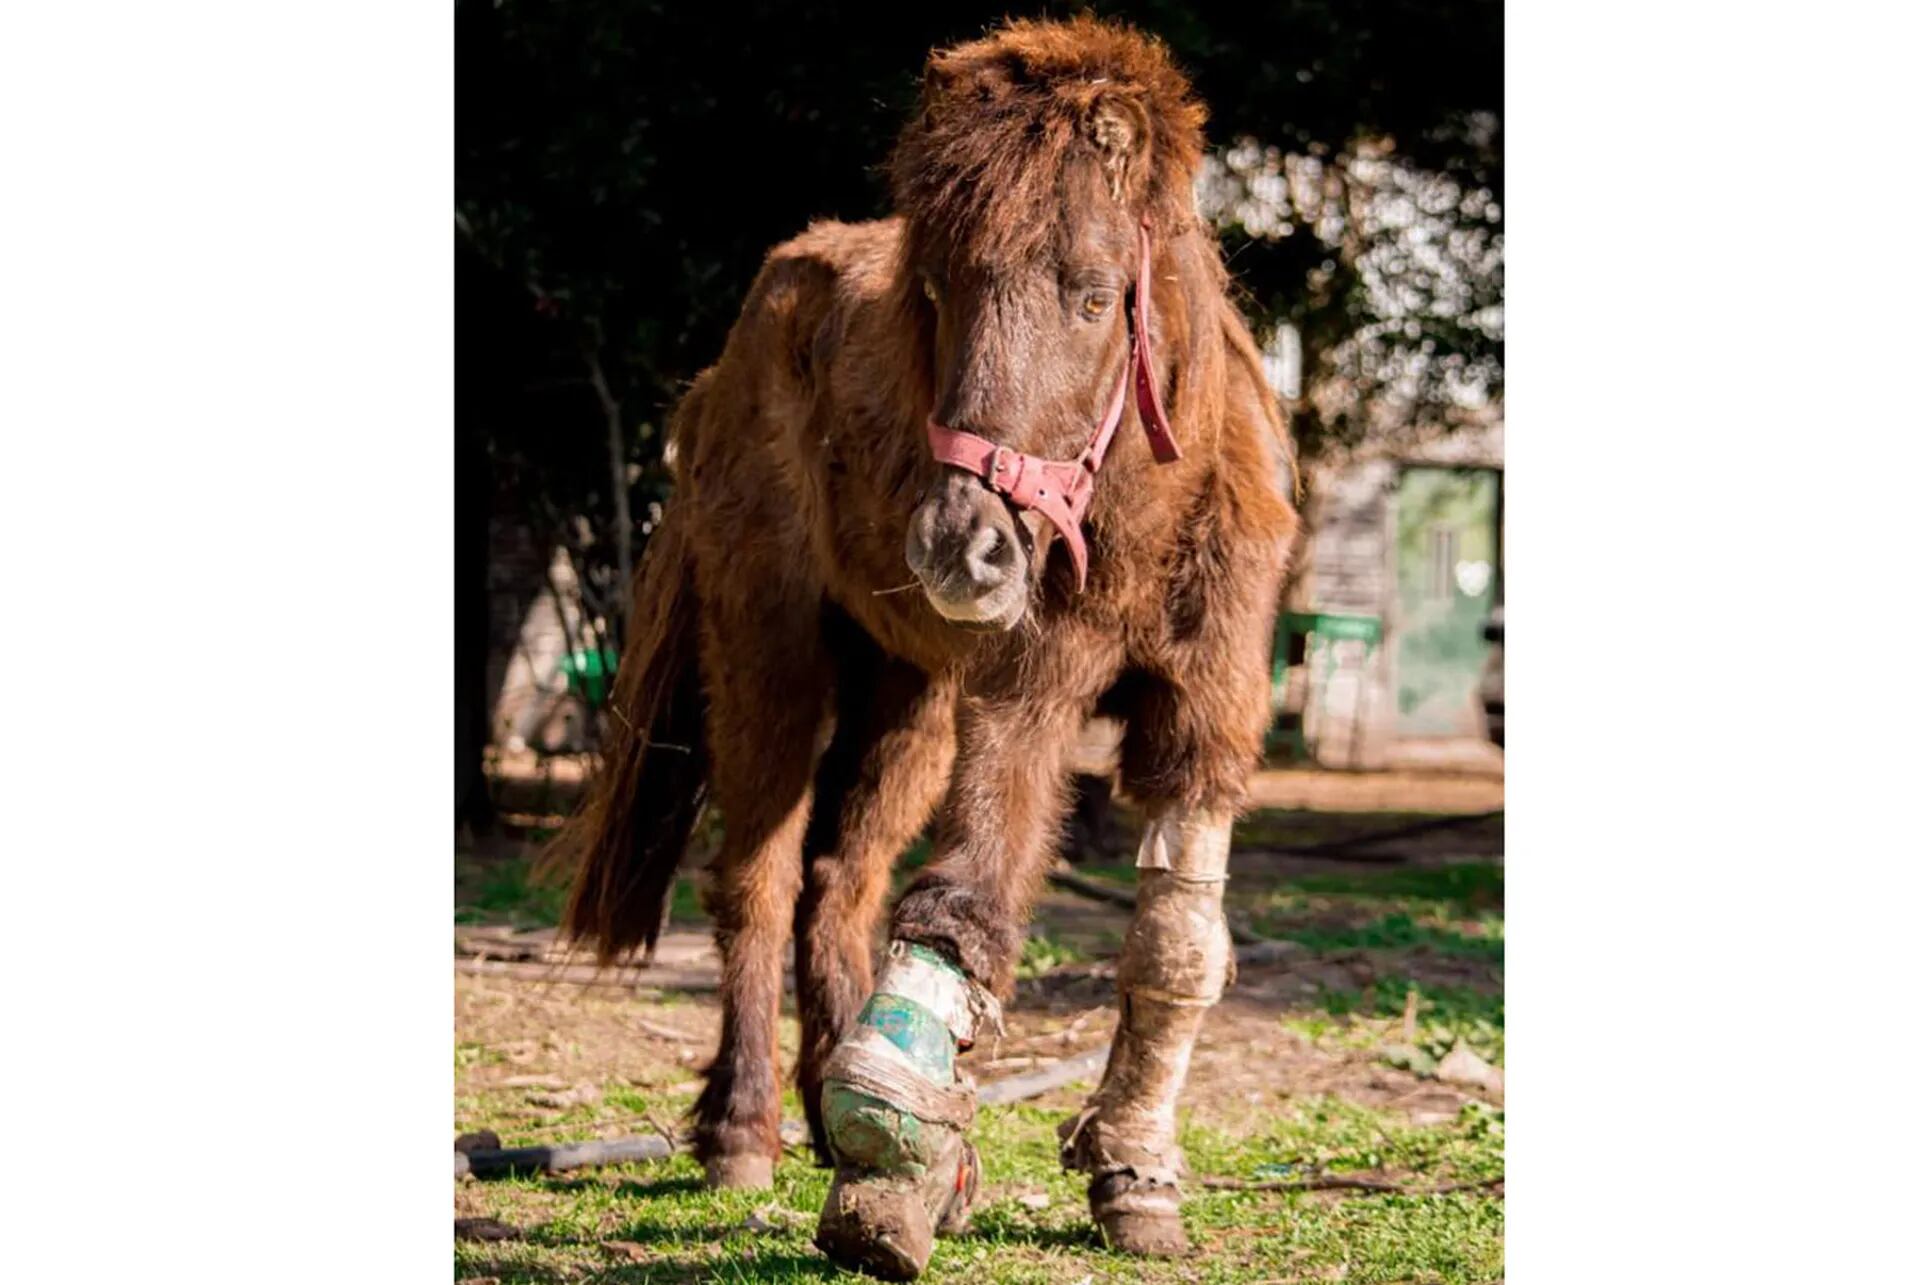 The pony Peregrino was ridden with a fracture in his head on his right.  Live on CRRE 